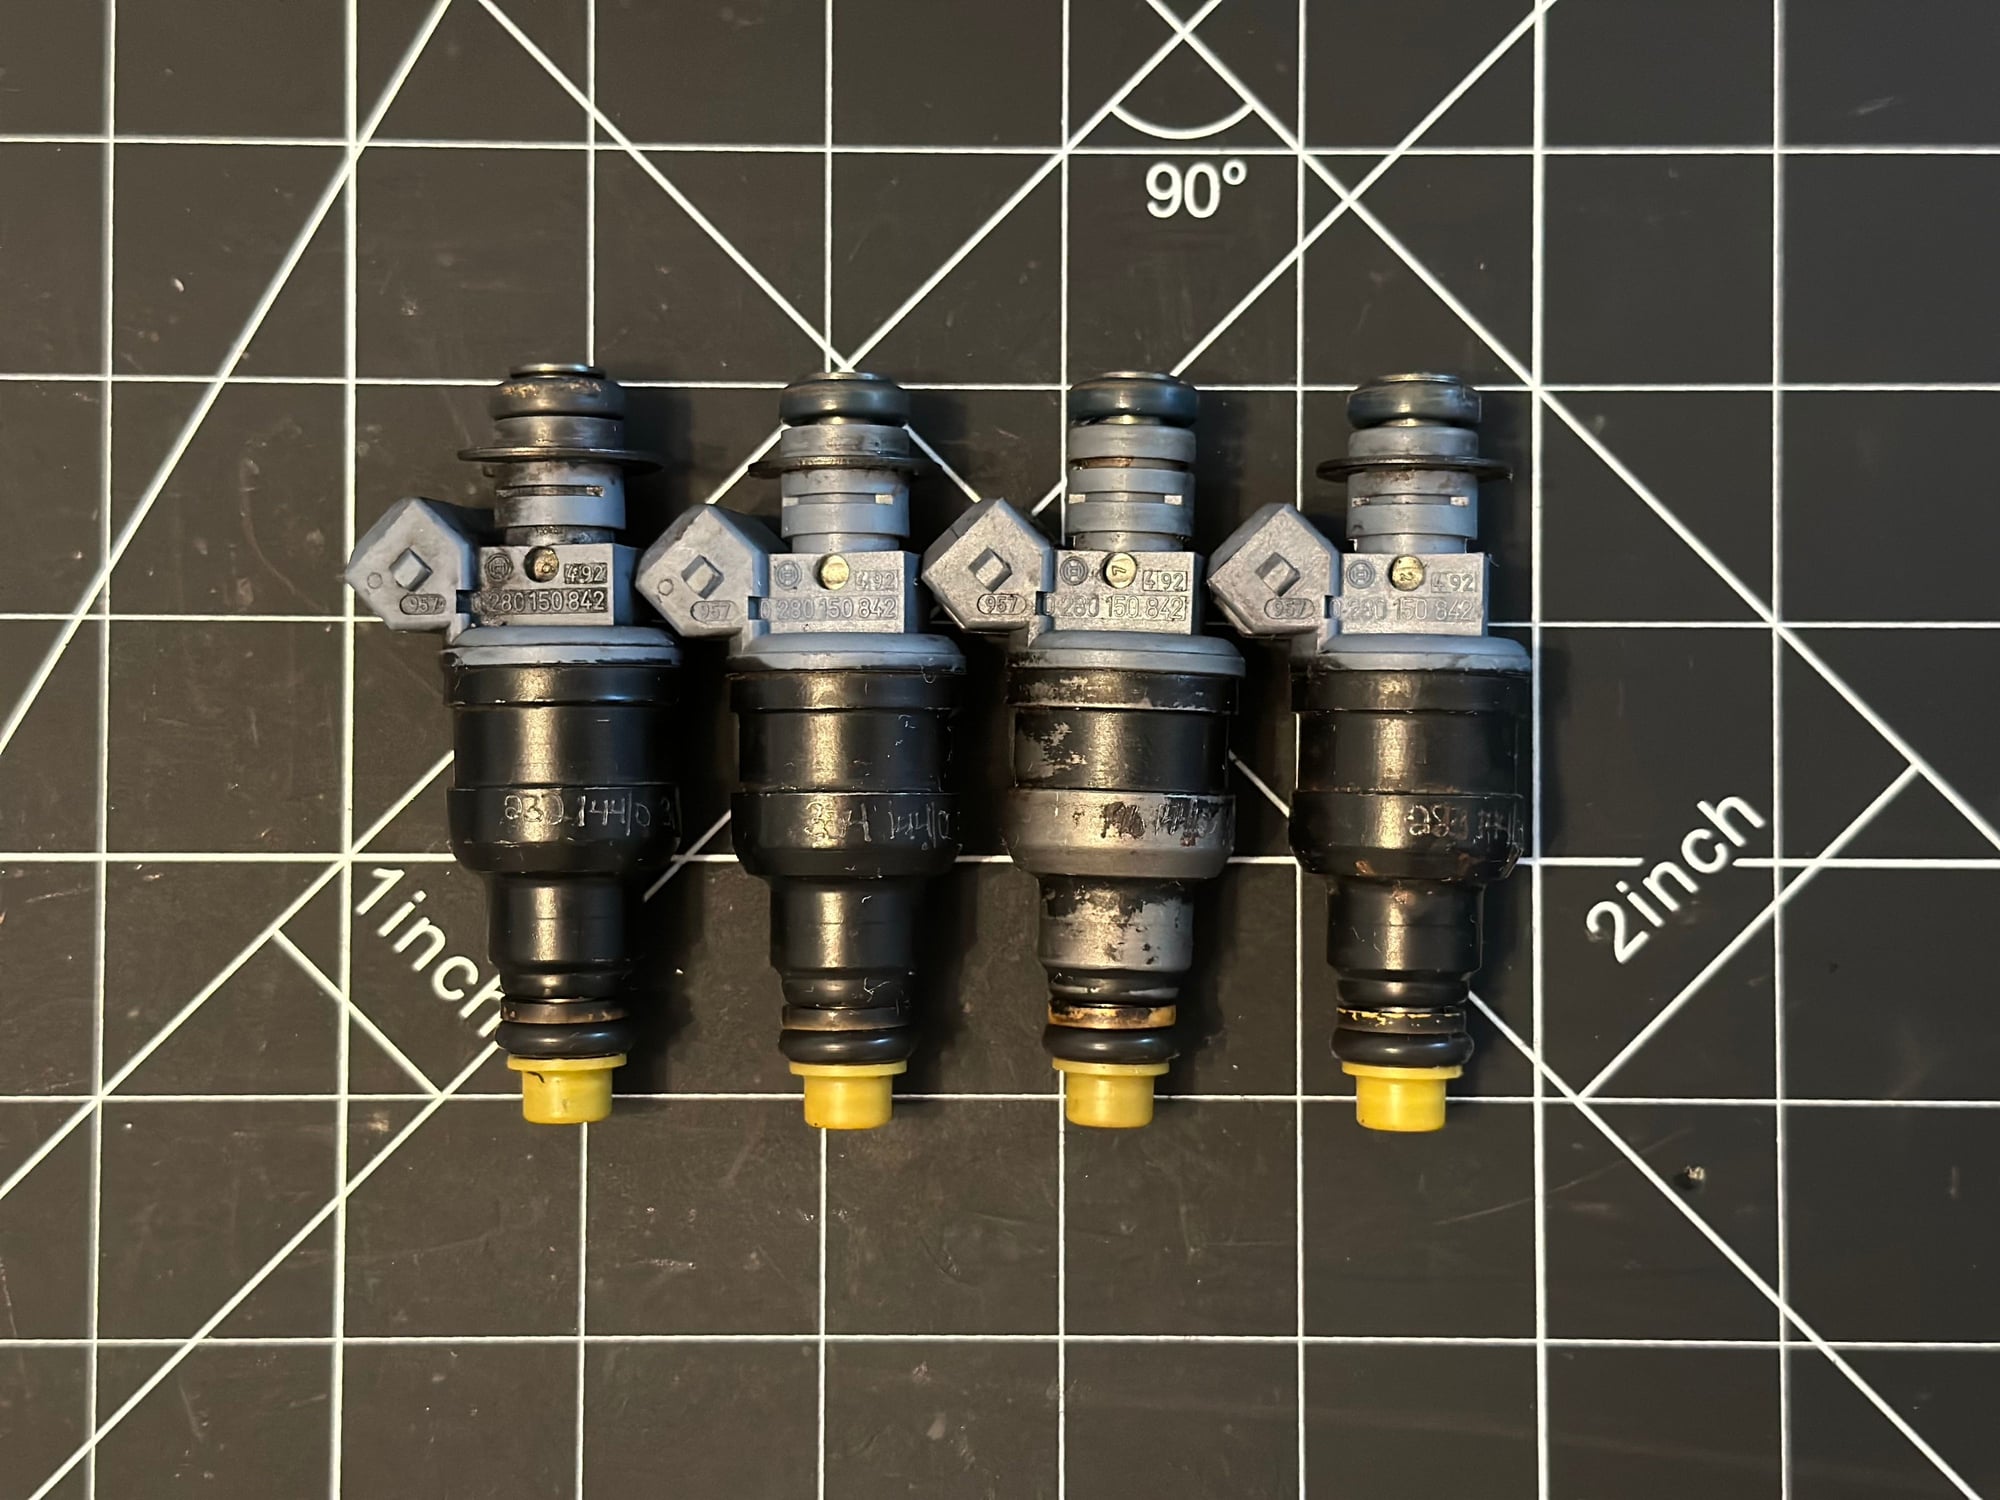 Engine - Intake/Fuel - Aeromotive FPR and Bosch Injectors - Used - 1985 to 2002 Mazda RX-7 - Chicago, IL 60605, United States